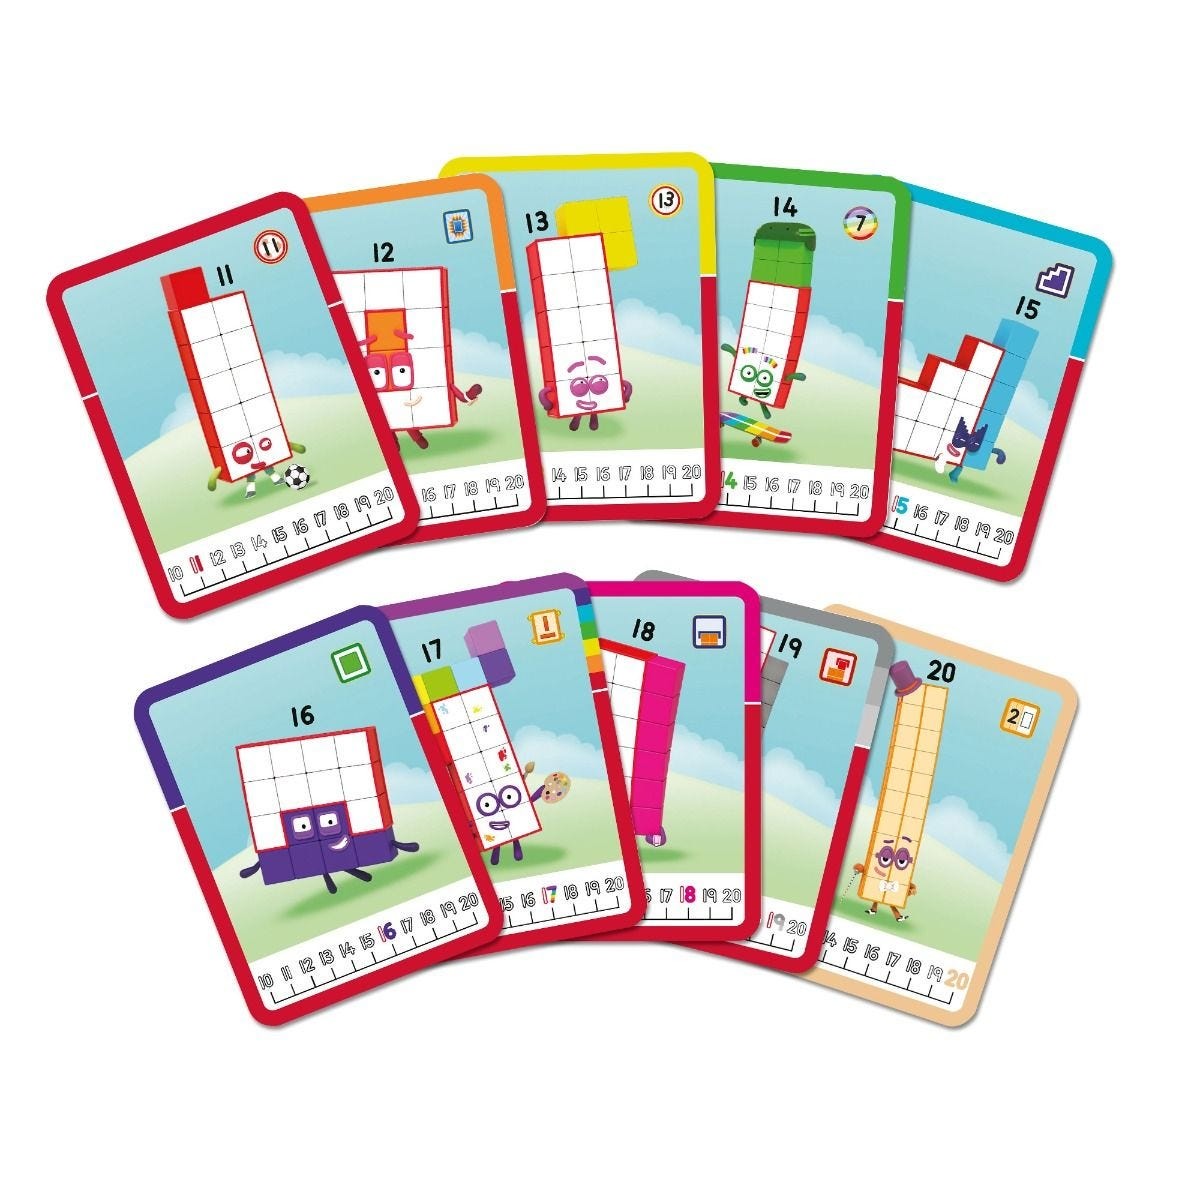 MathLink® Cubes Numberblocks 11- 20 Activity Set - Early Years Maths Learning with CBeebies Characters